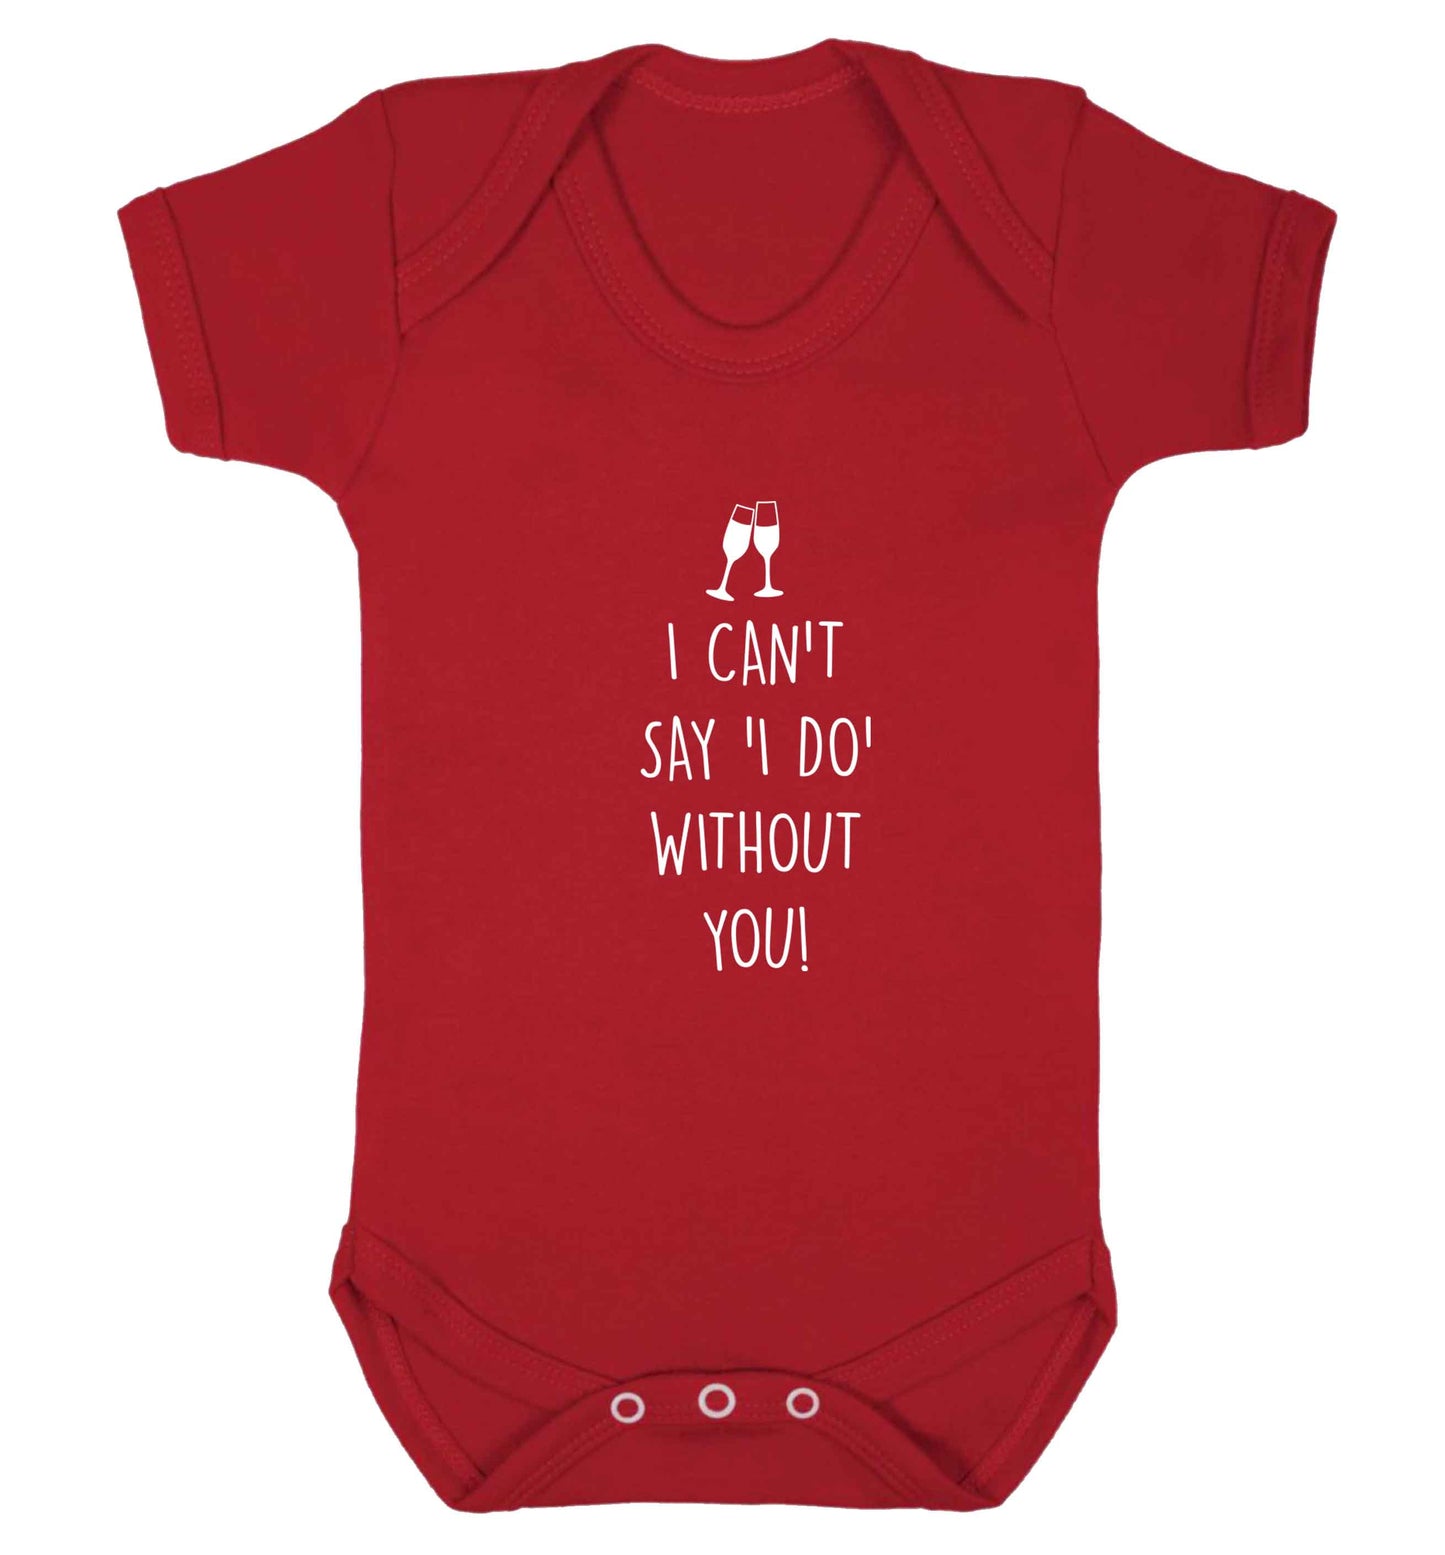 I can't say 'I do' without you! baby vest red 18-24 months